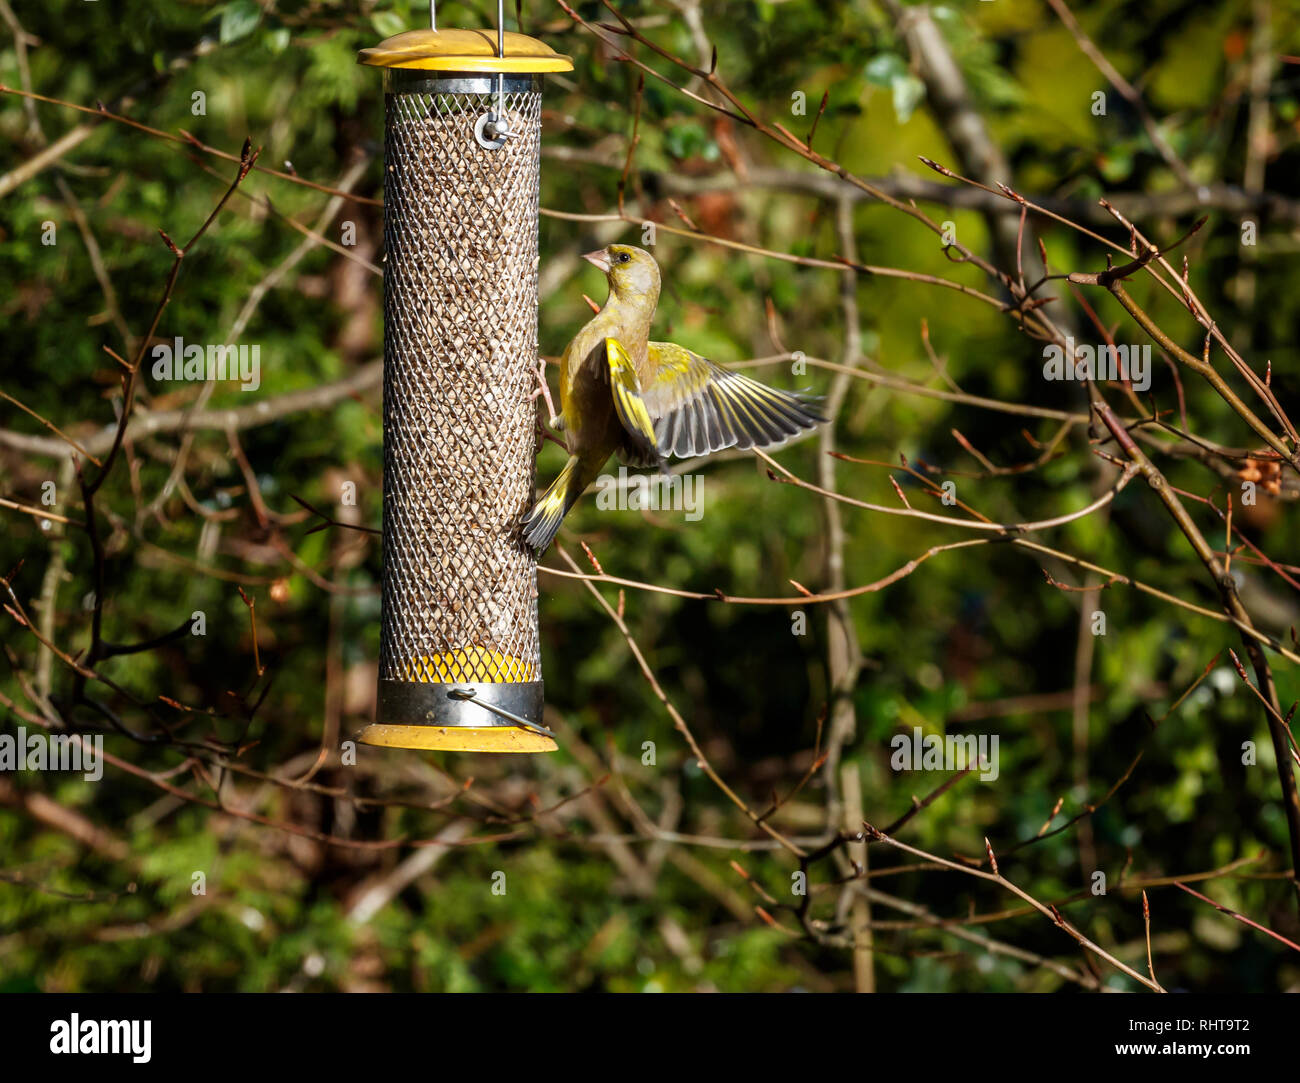 European Greenfinch Carduelis Chloris With Outstretched Wings In